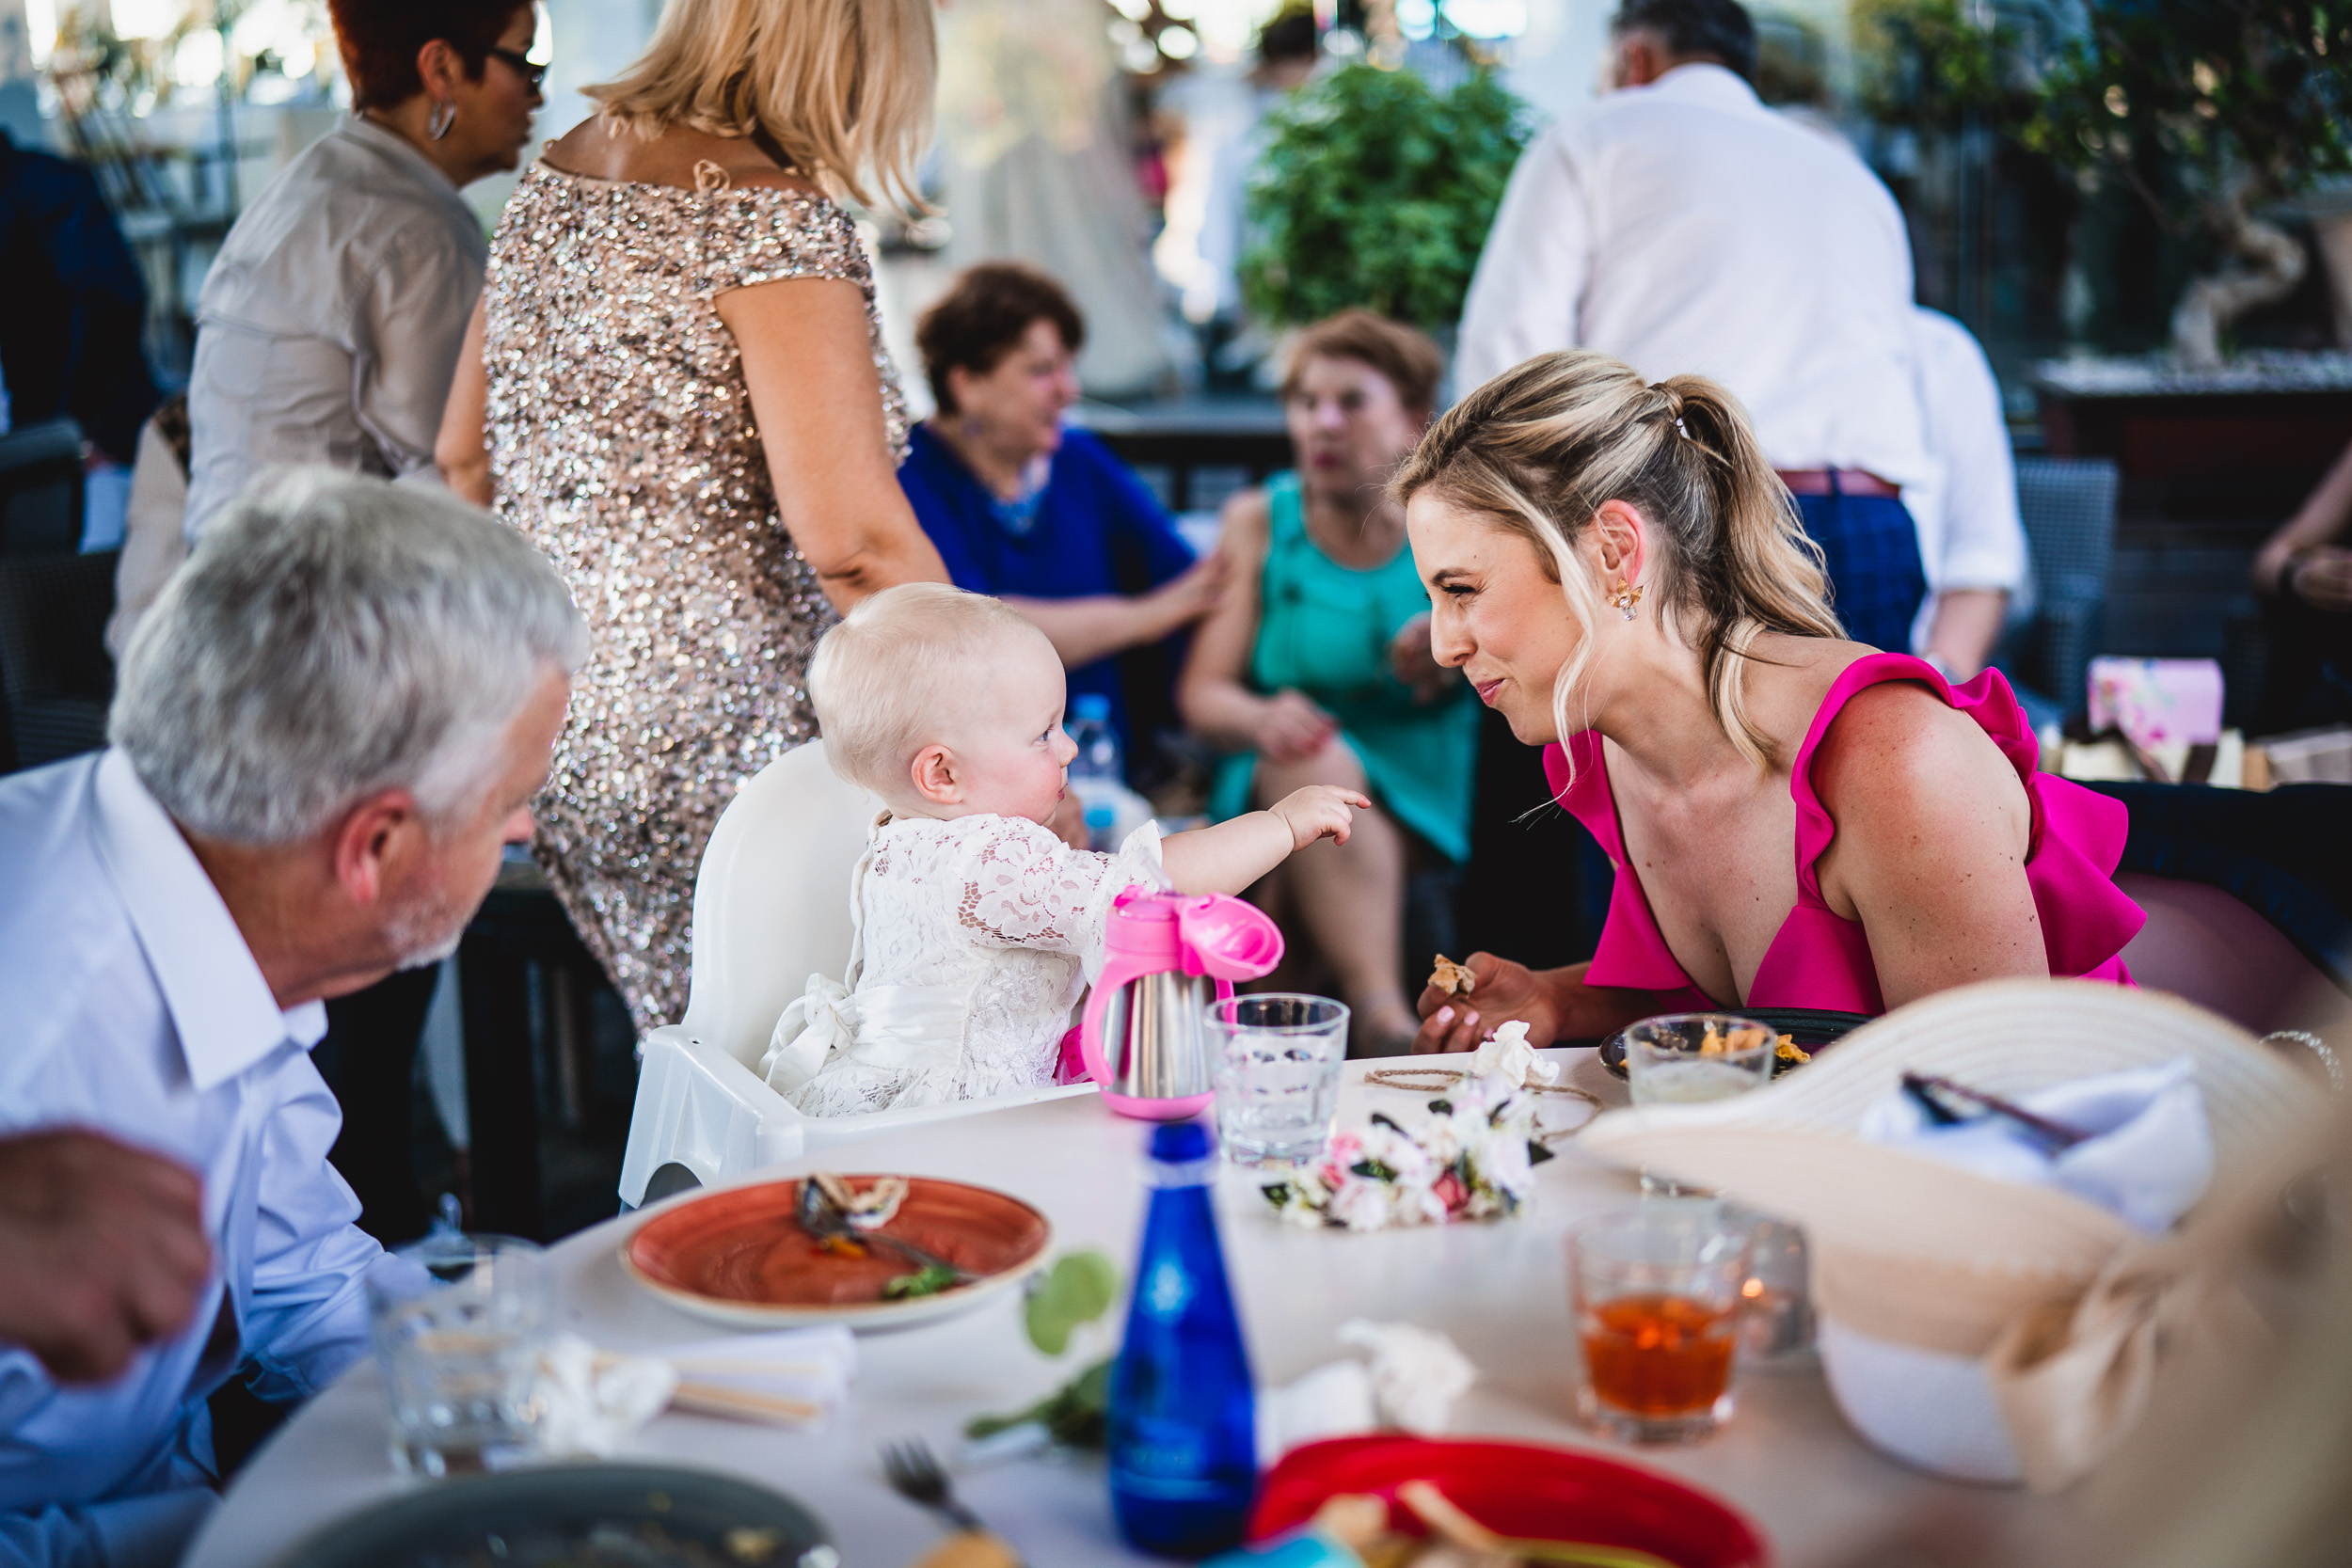 A woman with a baby sits at a table with other guests at a wedding reception.